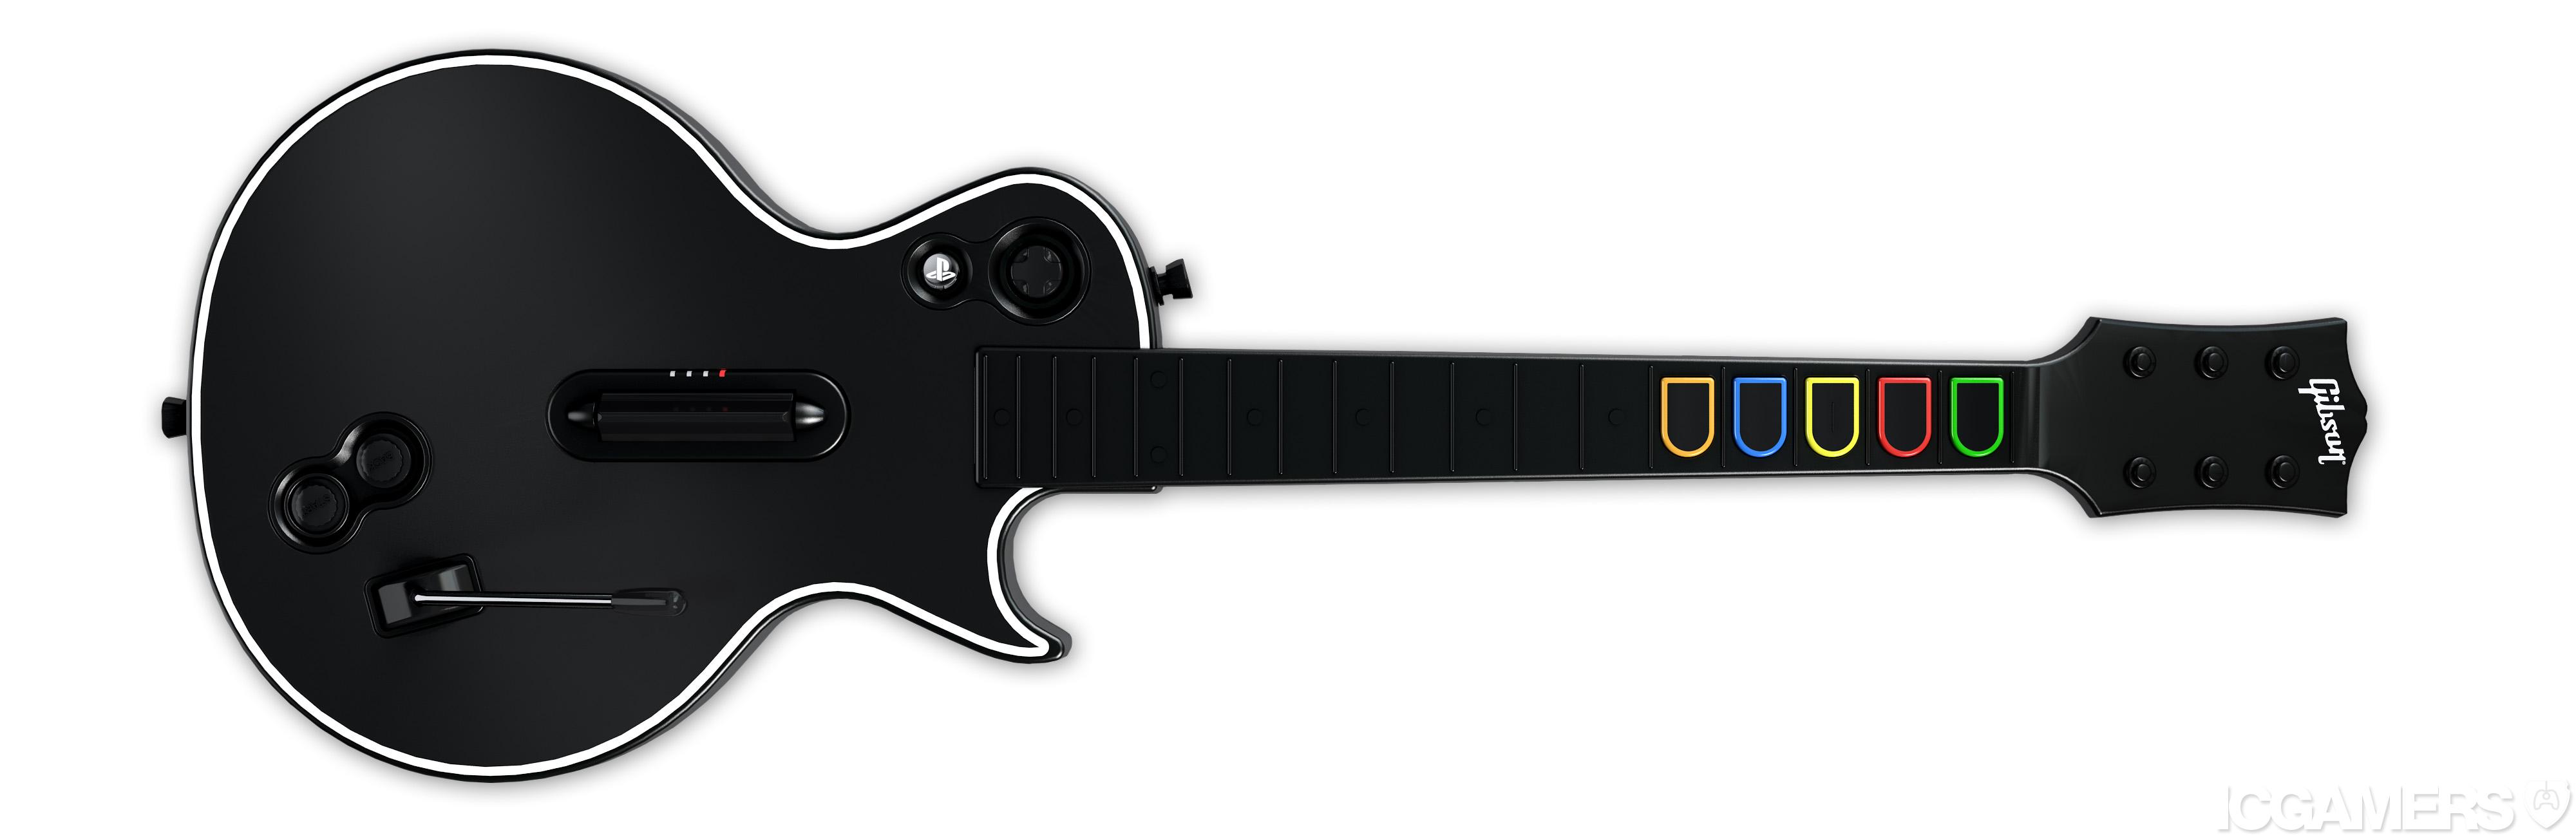 can you use a ps2 guitar hero controller on pc